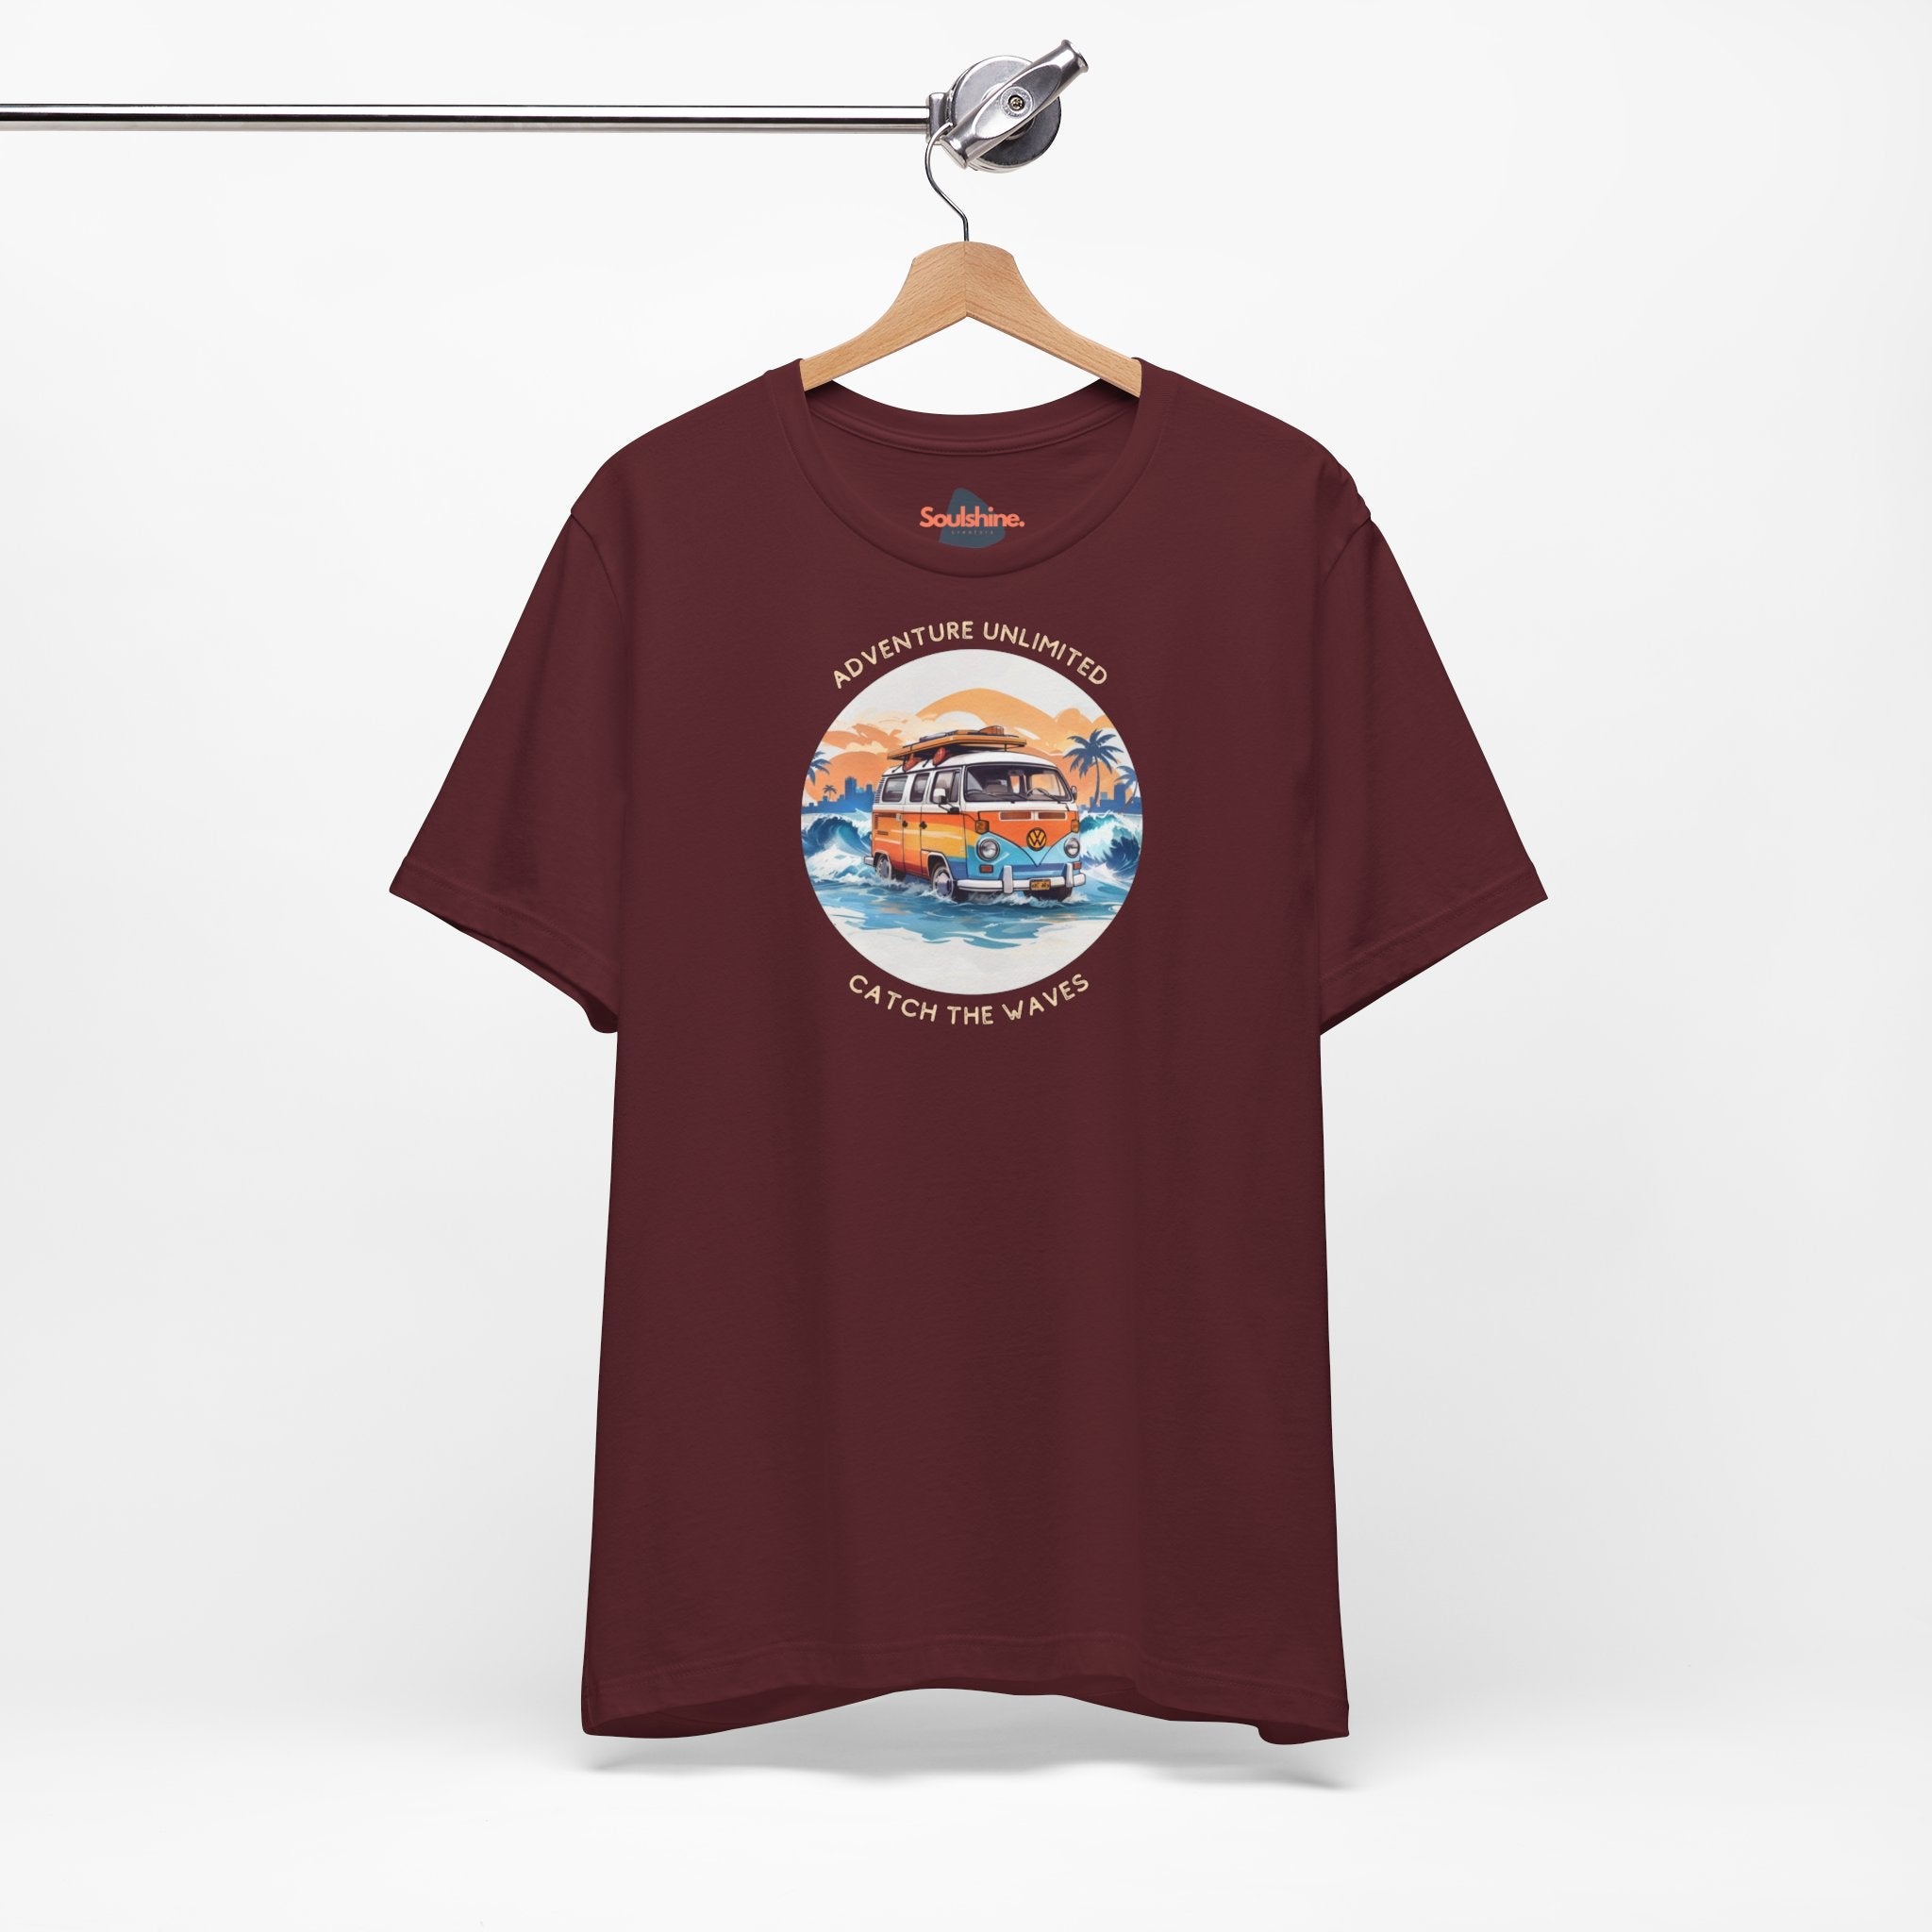 Adventure Unlimited - Surfing T-Shirt featuring ’on it’ slogan printed - Bella & Canvas EU